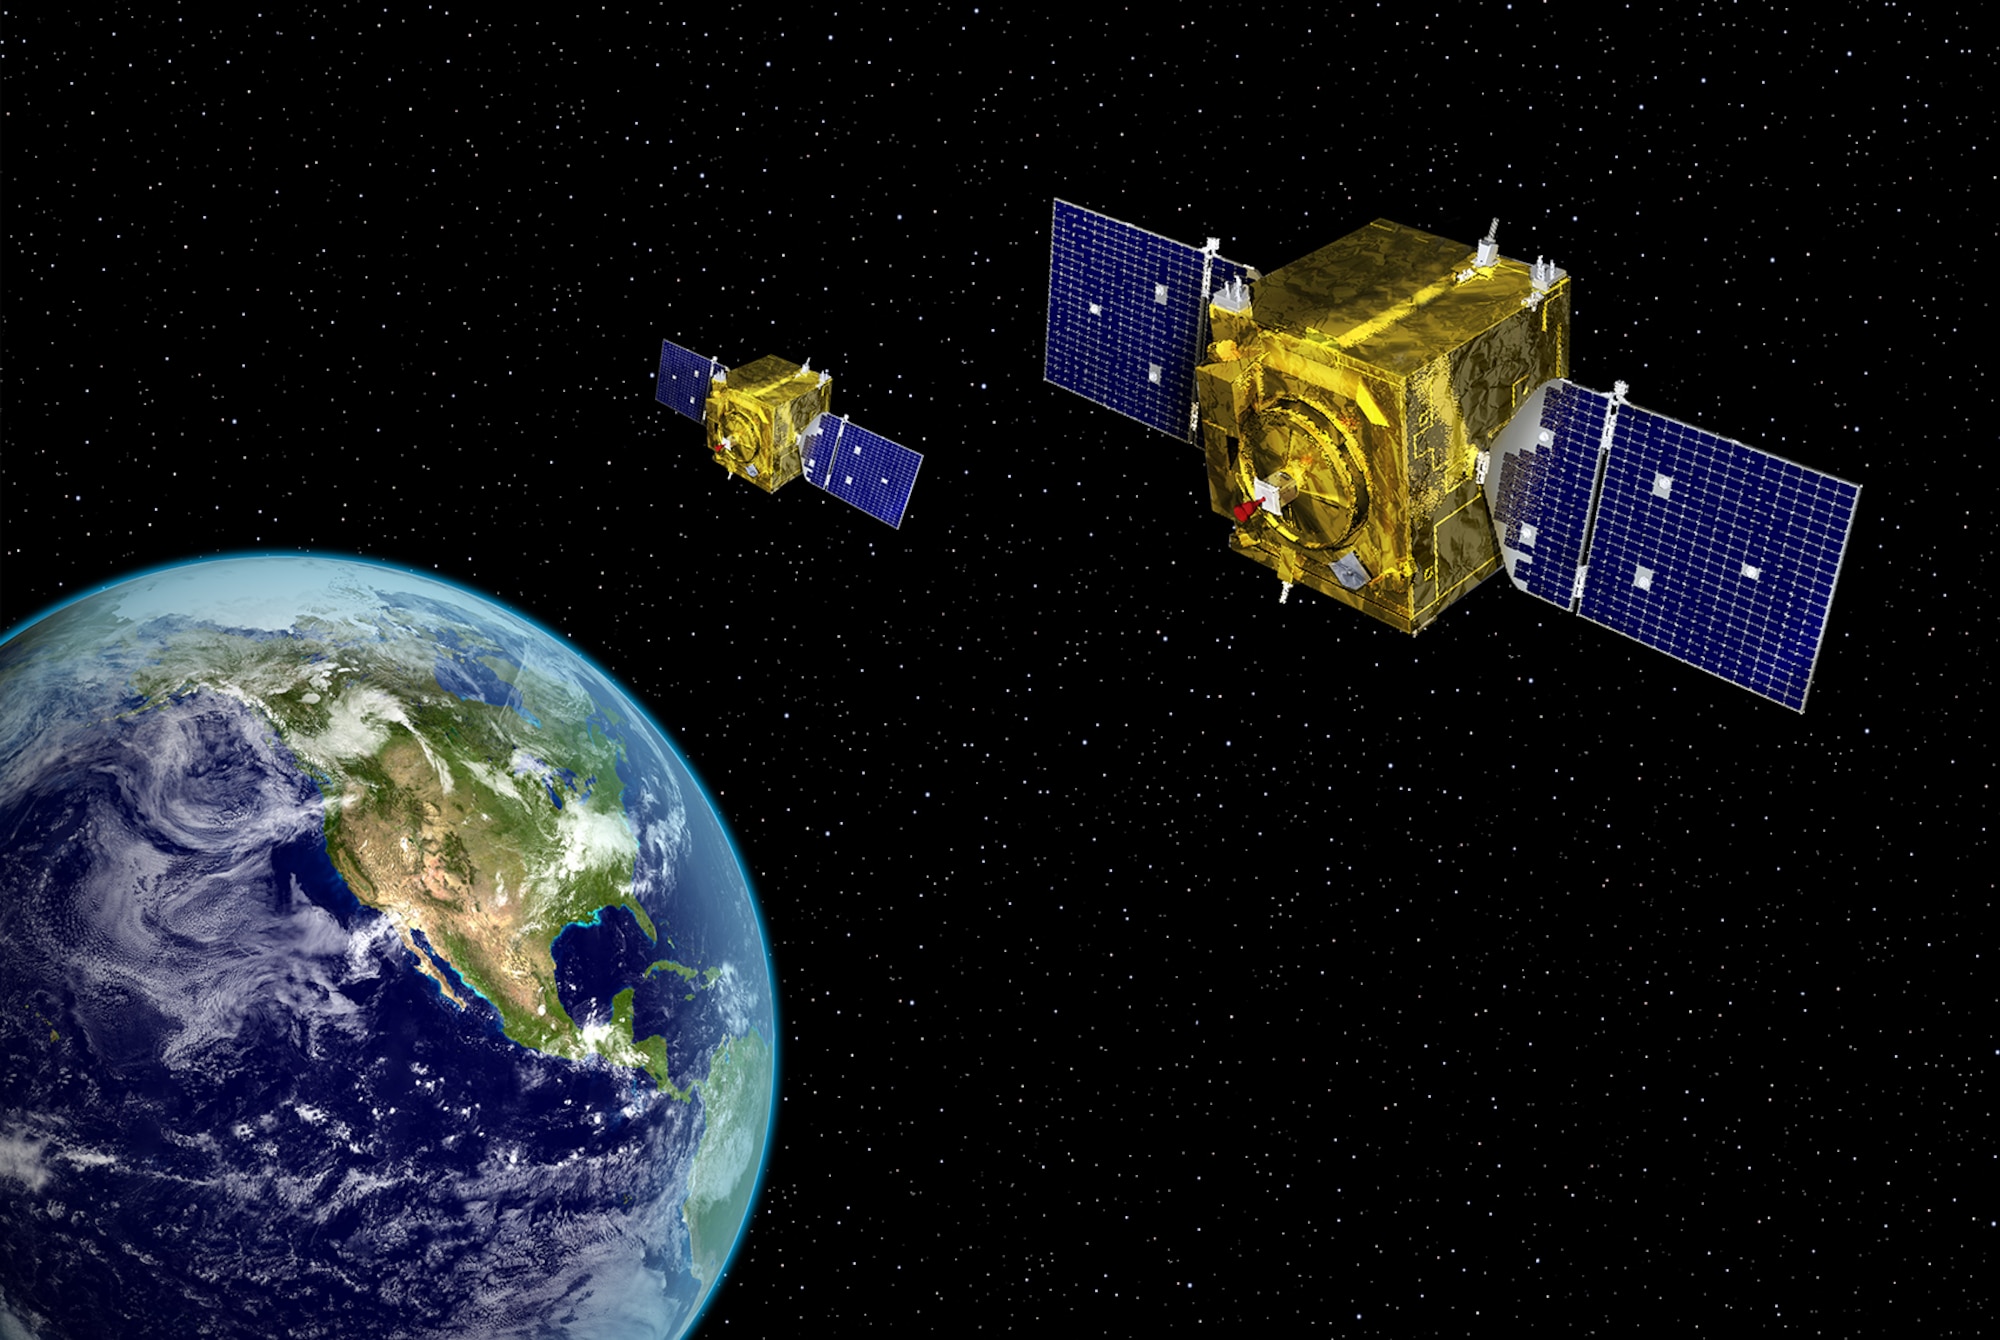 Geosynchronous Space Situational Awareness Program artist rendering. Air Force Space Command’s “Neighborhood Watch” Satellites, the Geosynchronous Space Situational Awareness Program, recently responded to the Navy’s request for help with a satellite of its own.